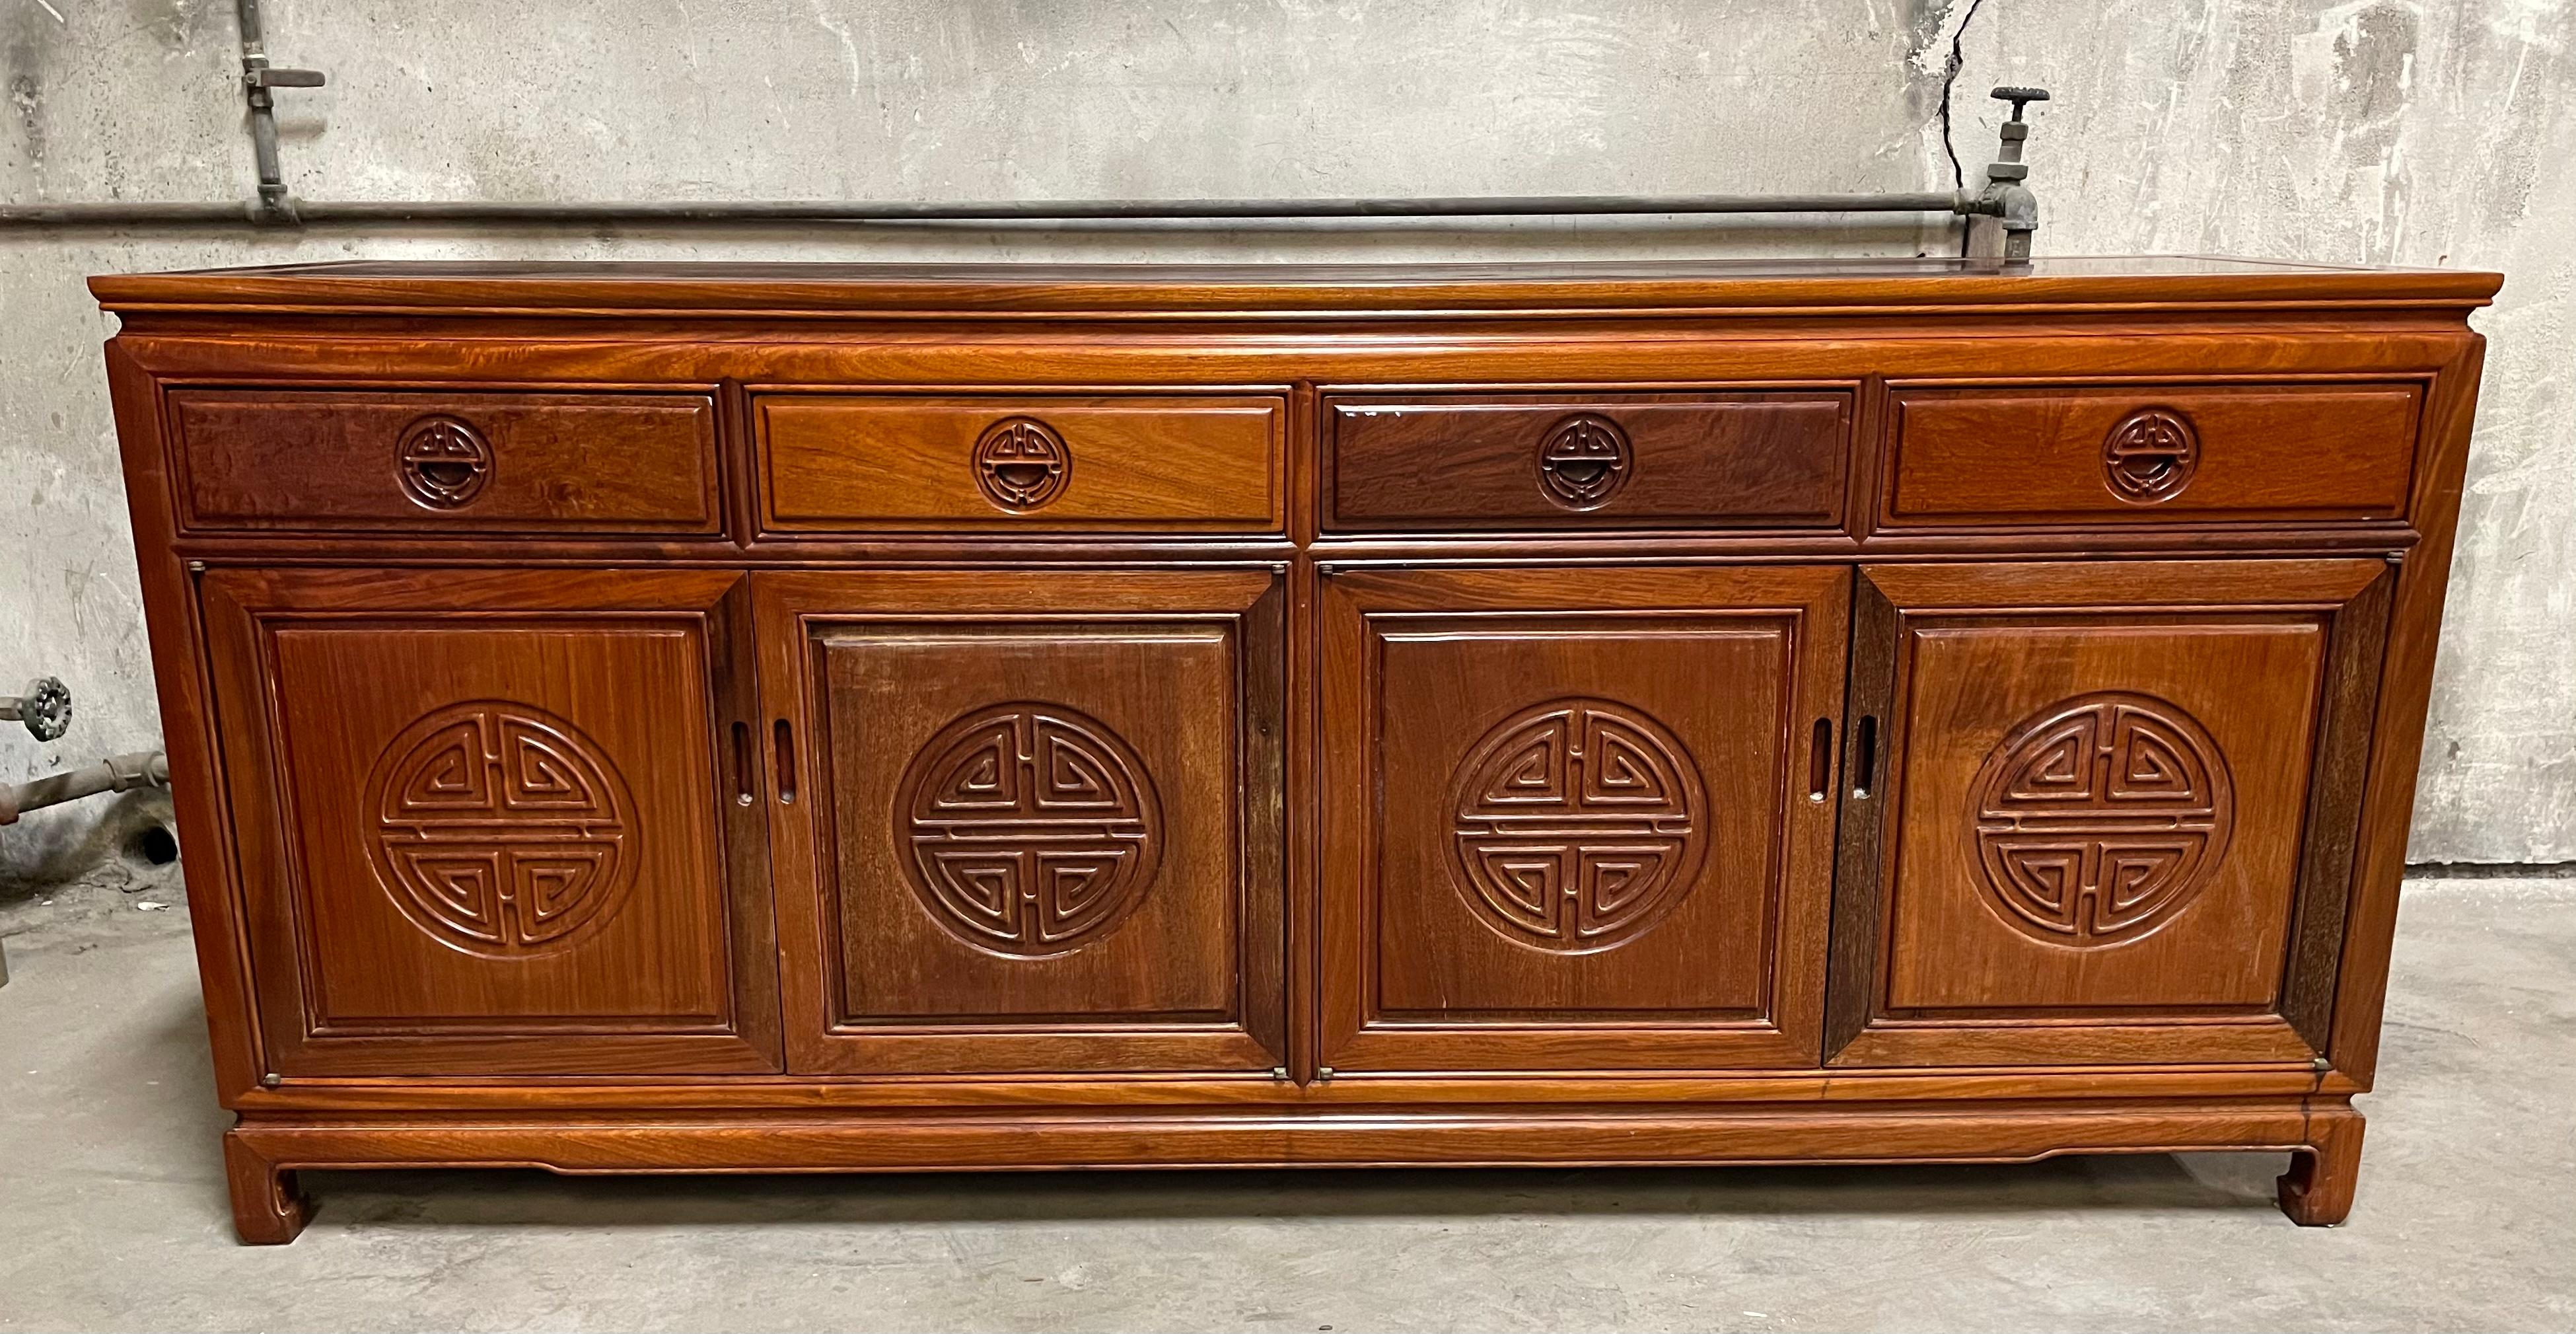 Handsome solid teak Chinoiserie Hollywood Regency buffet or credenza by George Zee. It is in fabulous vintage condition. It has no outstanding flaws that we have detected. It does have some small age appropriate coloration. Please see photos. Circa